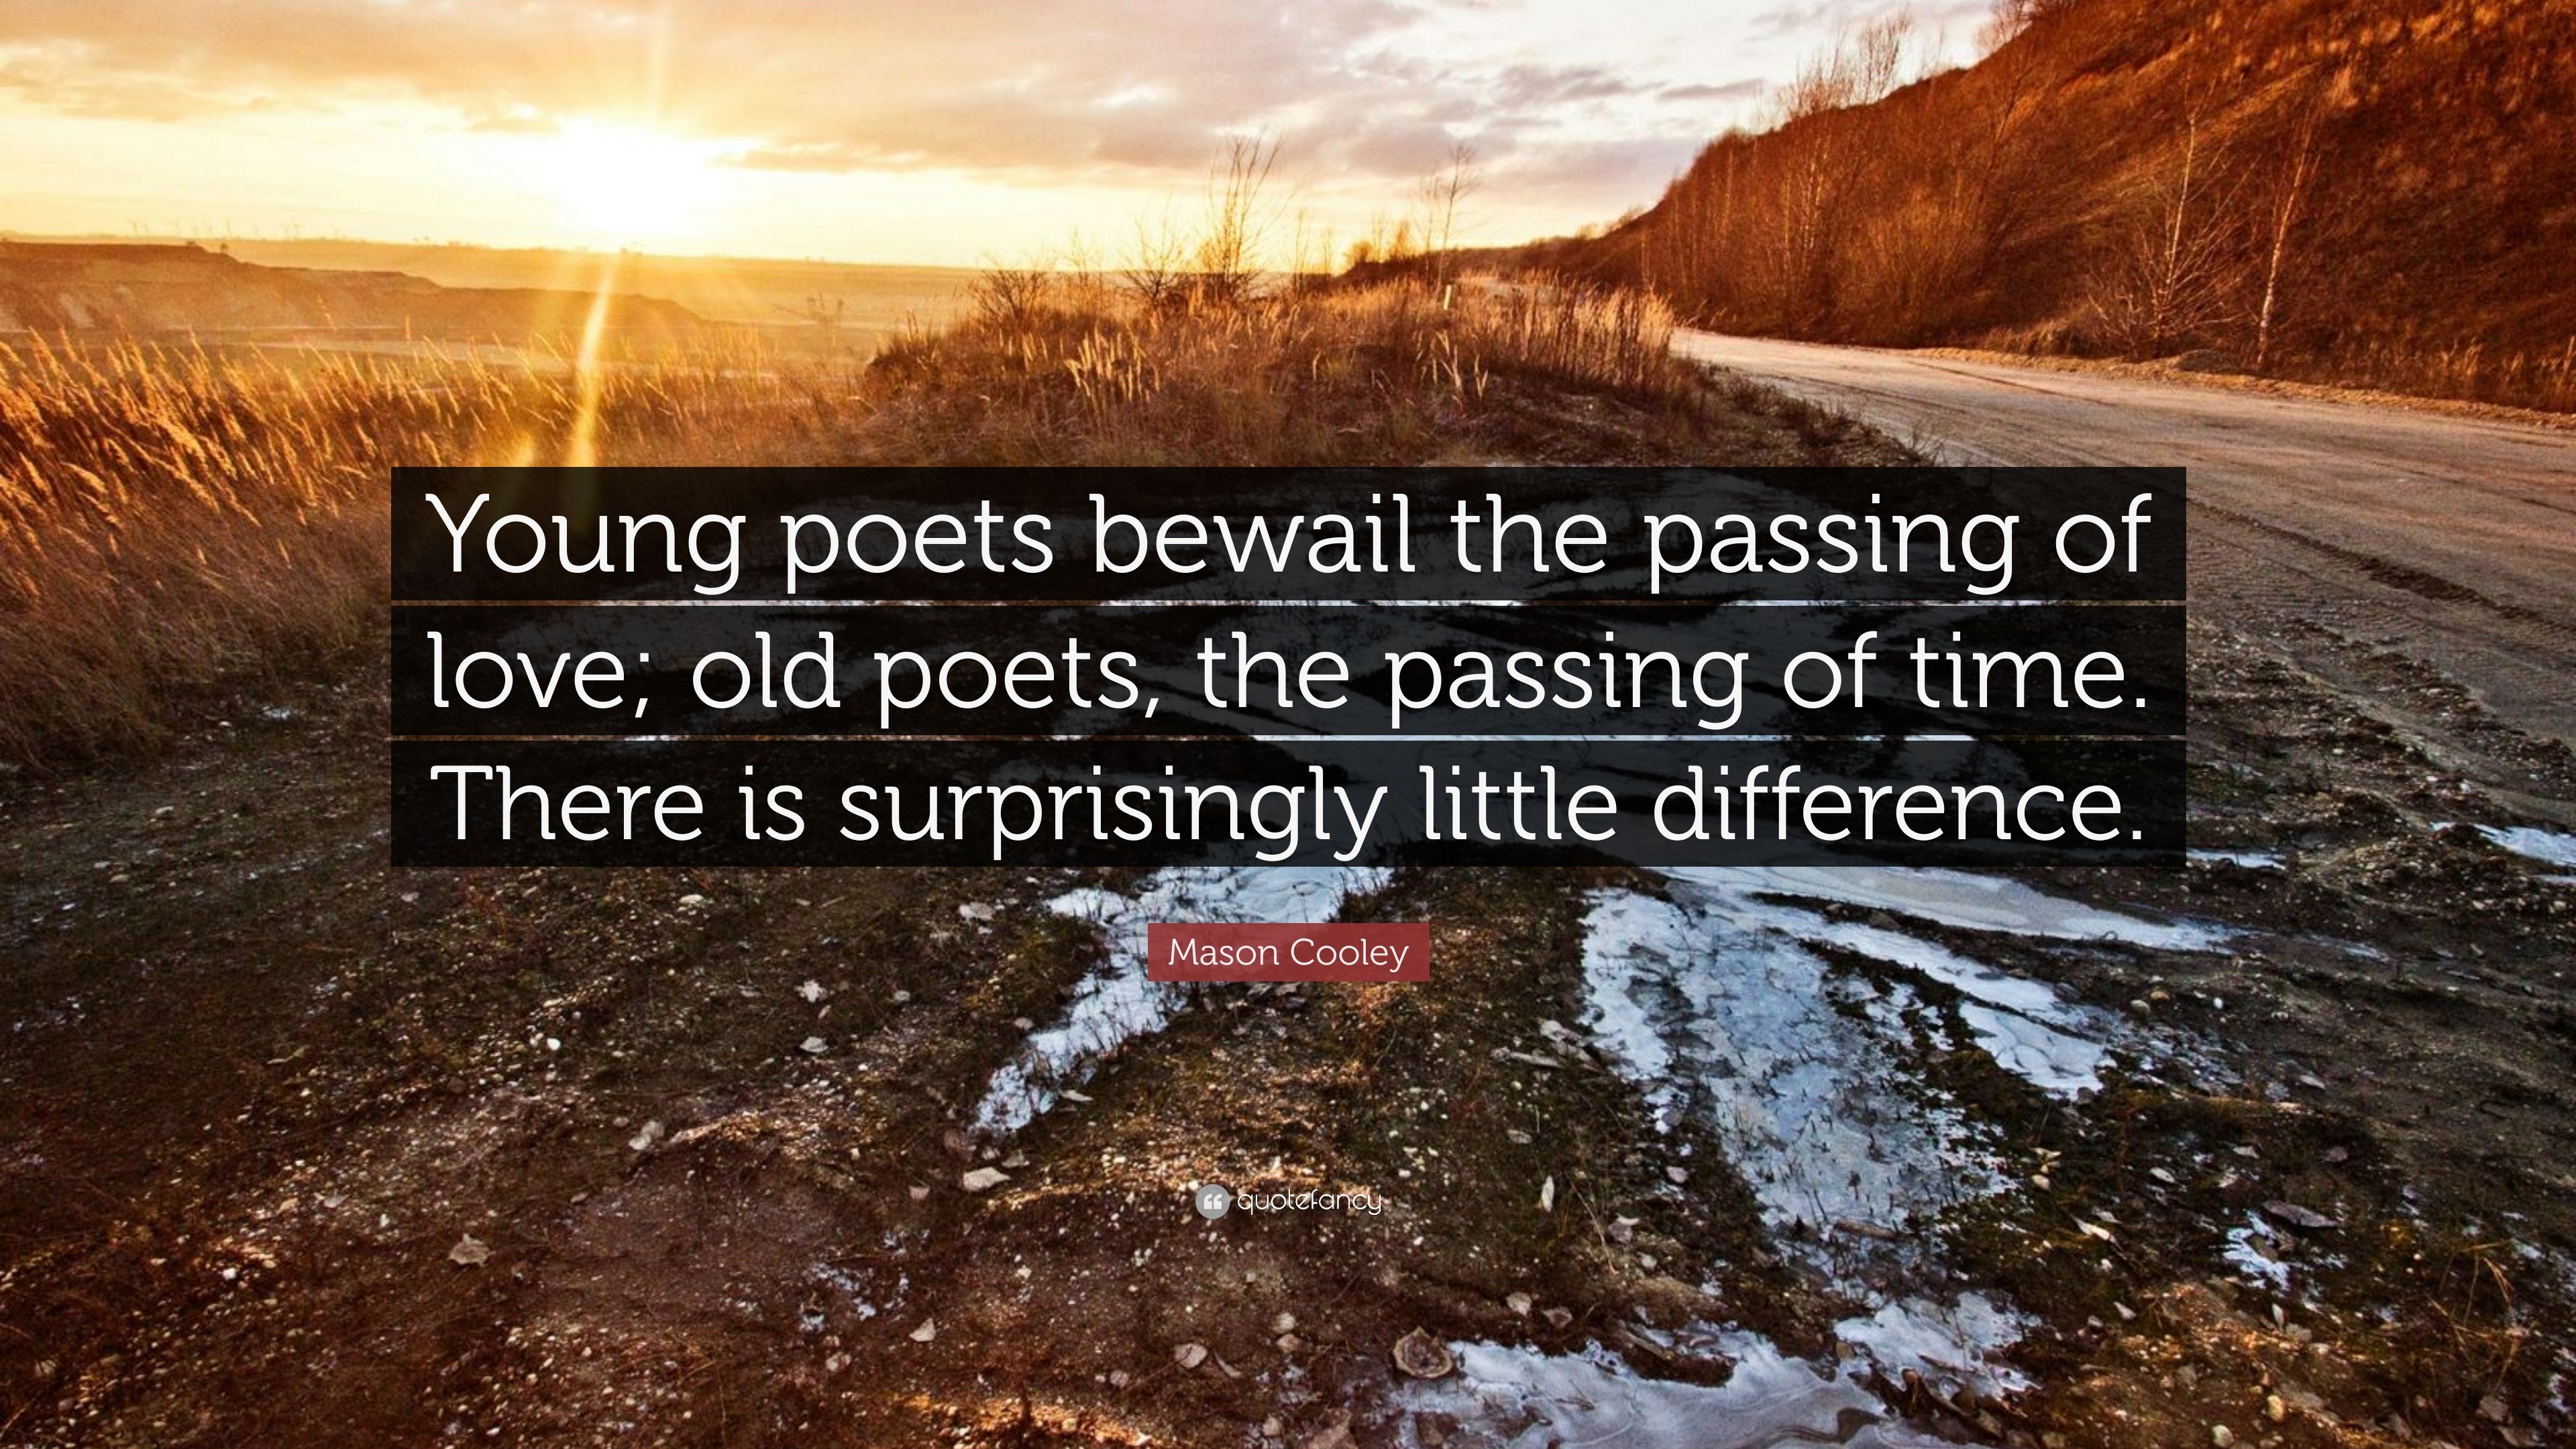 Mason Cooley Quote “Young poets bewail the passing of love old poets